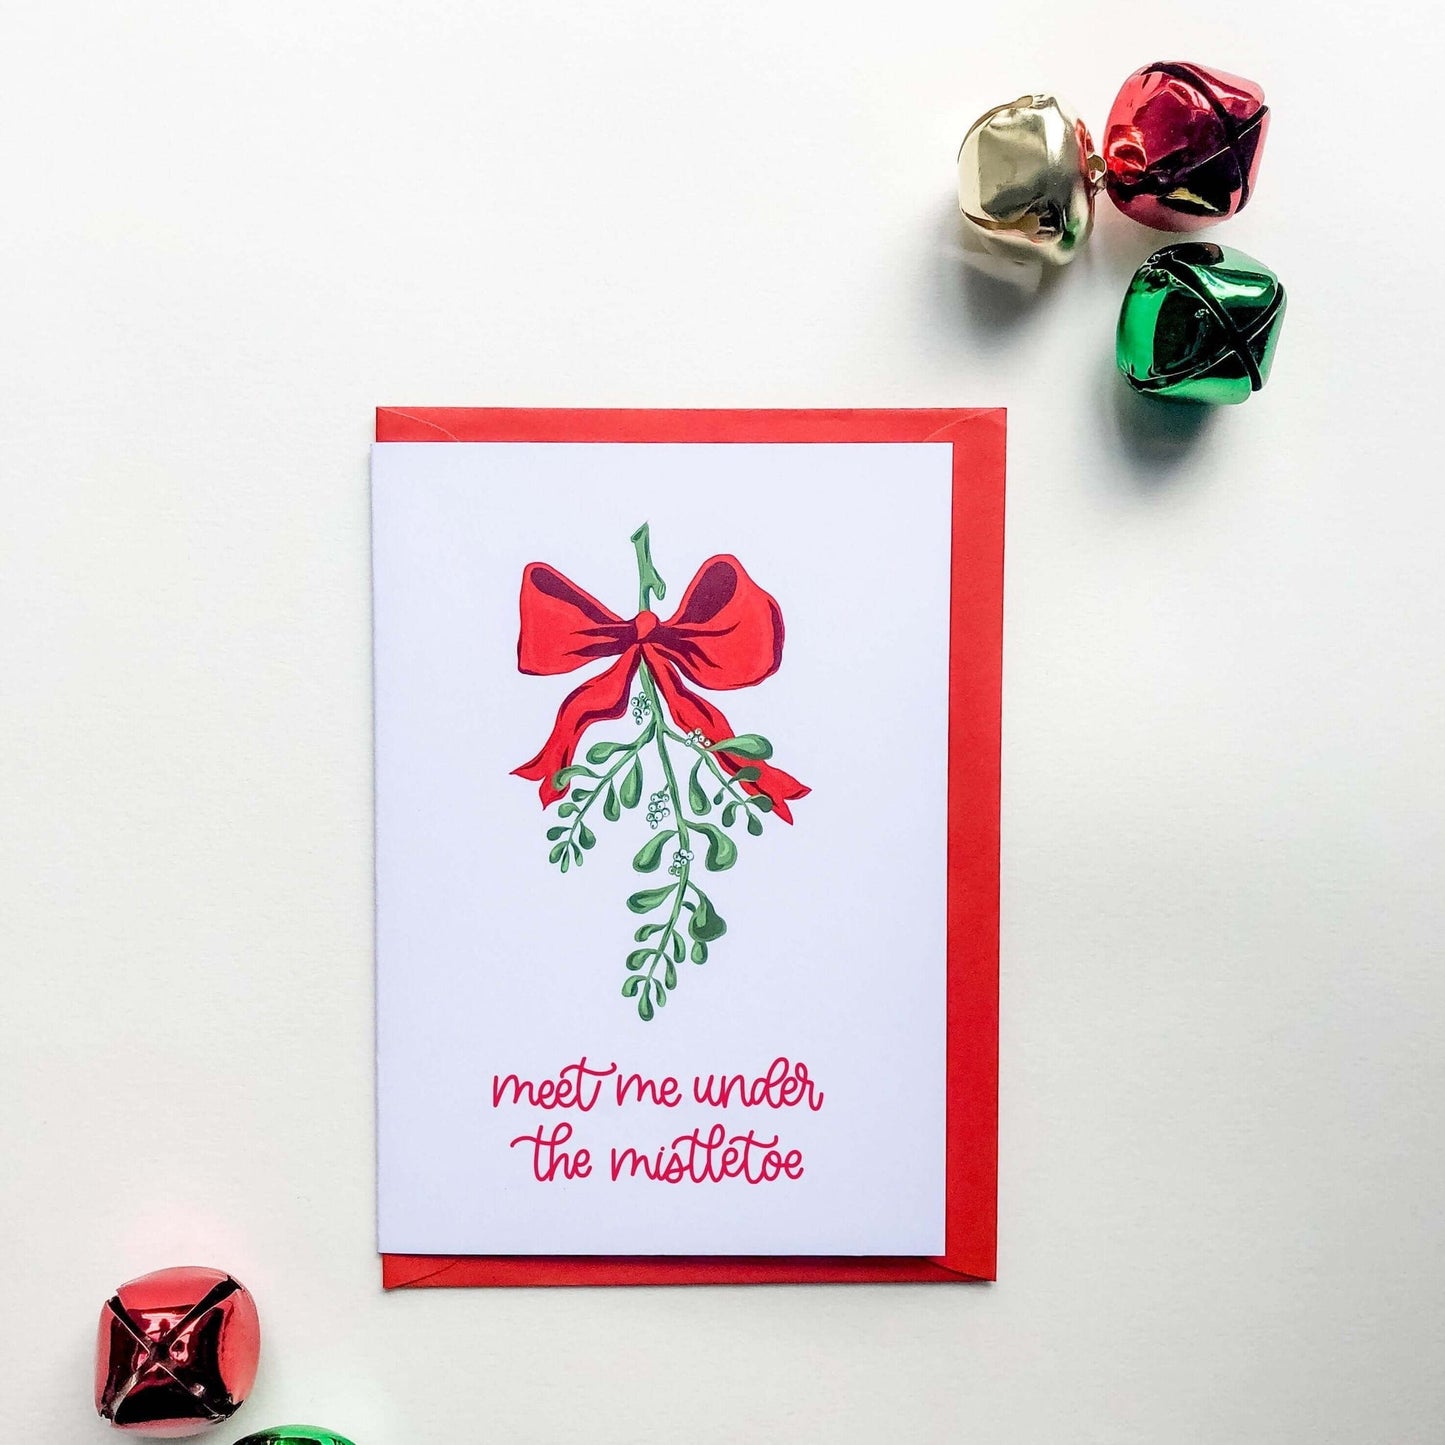 Hue Complete Me Greeting & Note Cards Meet Me Under The Mistletoe Christmas Card - Hue Complete Me